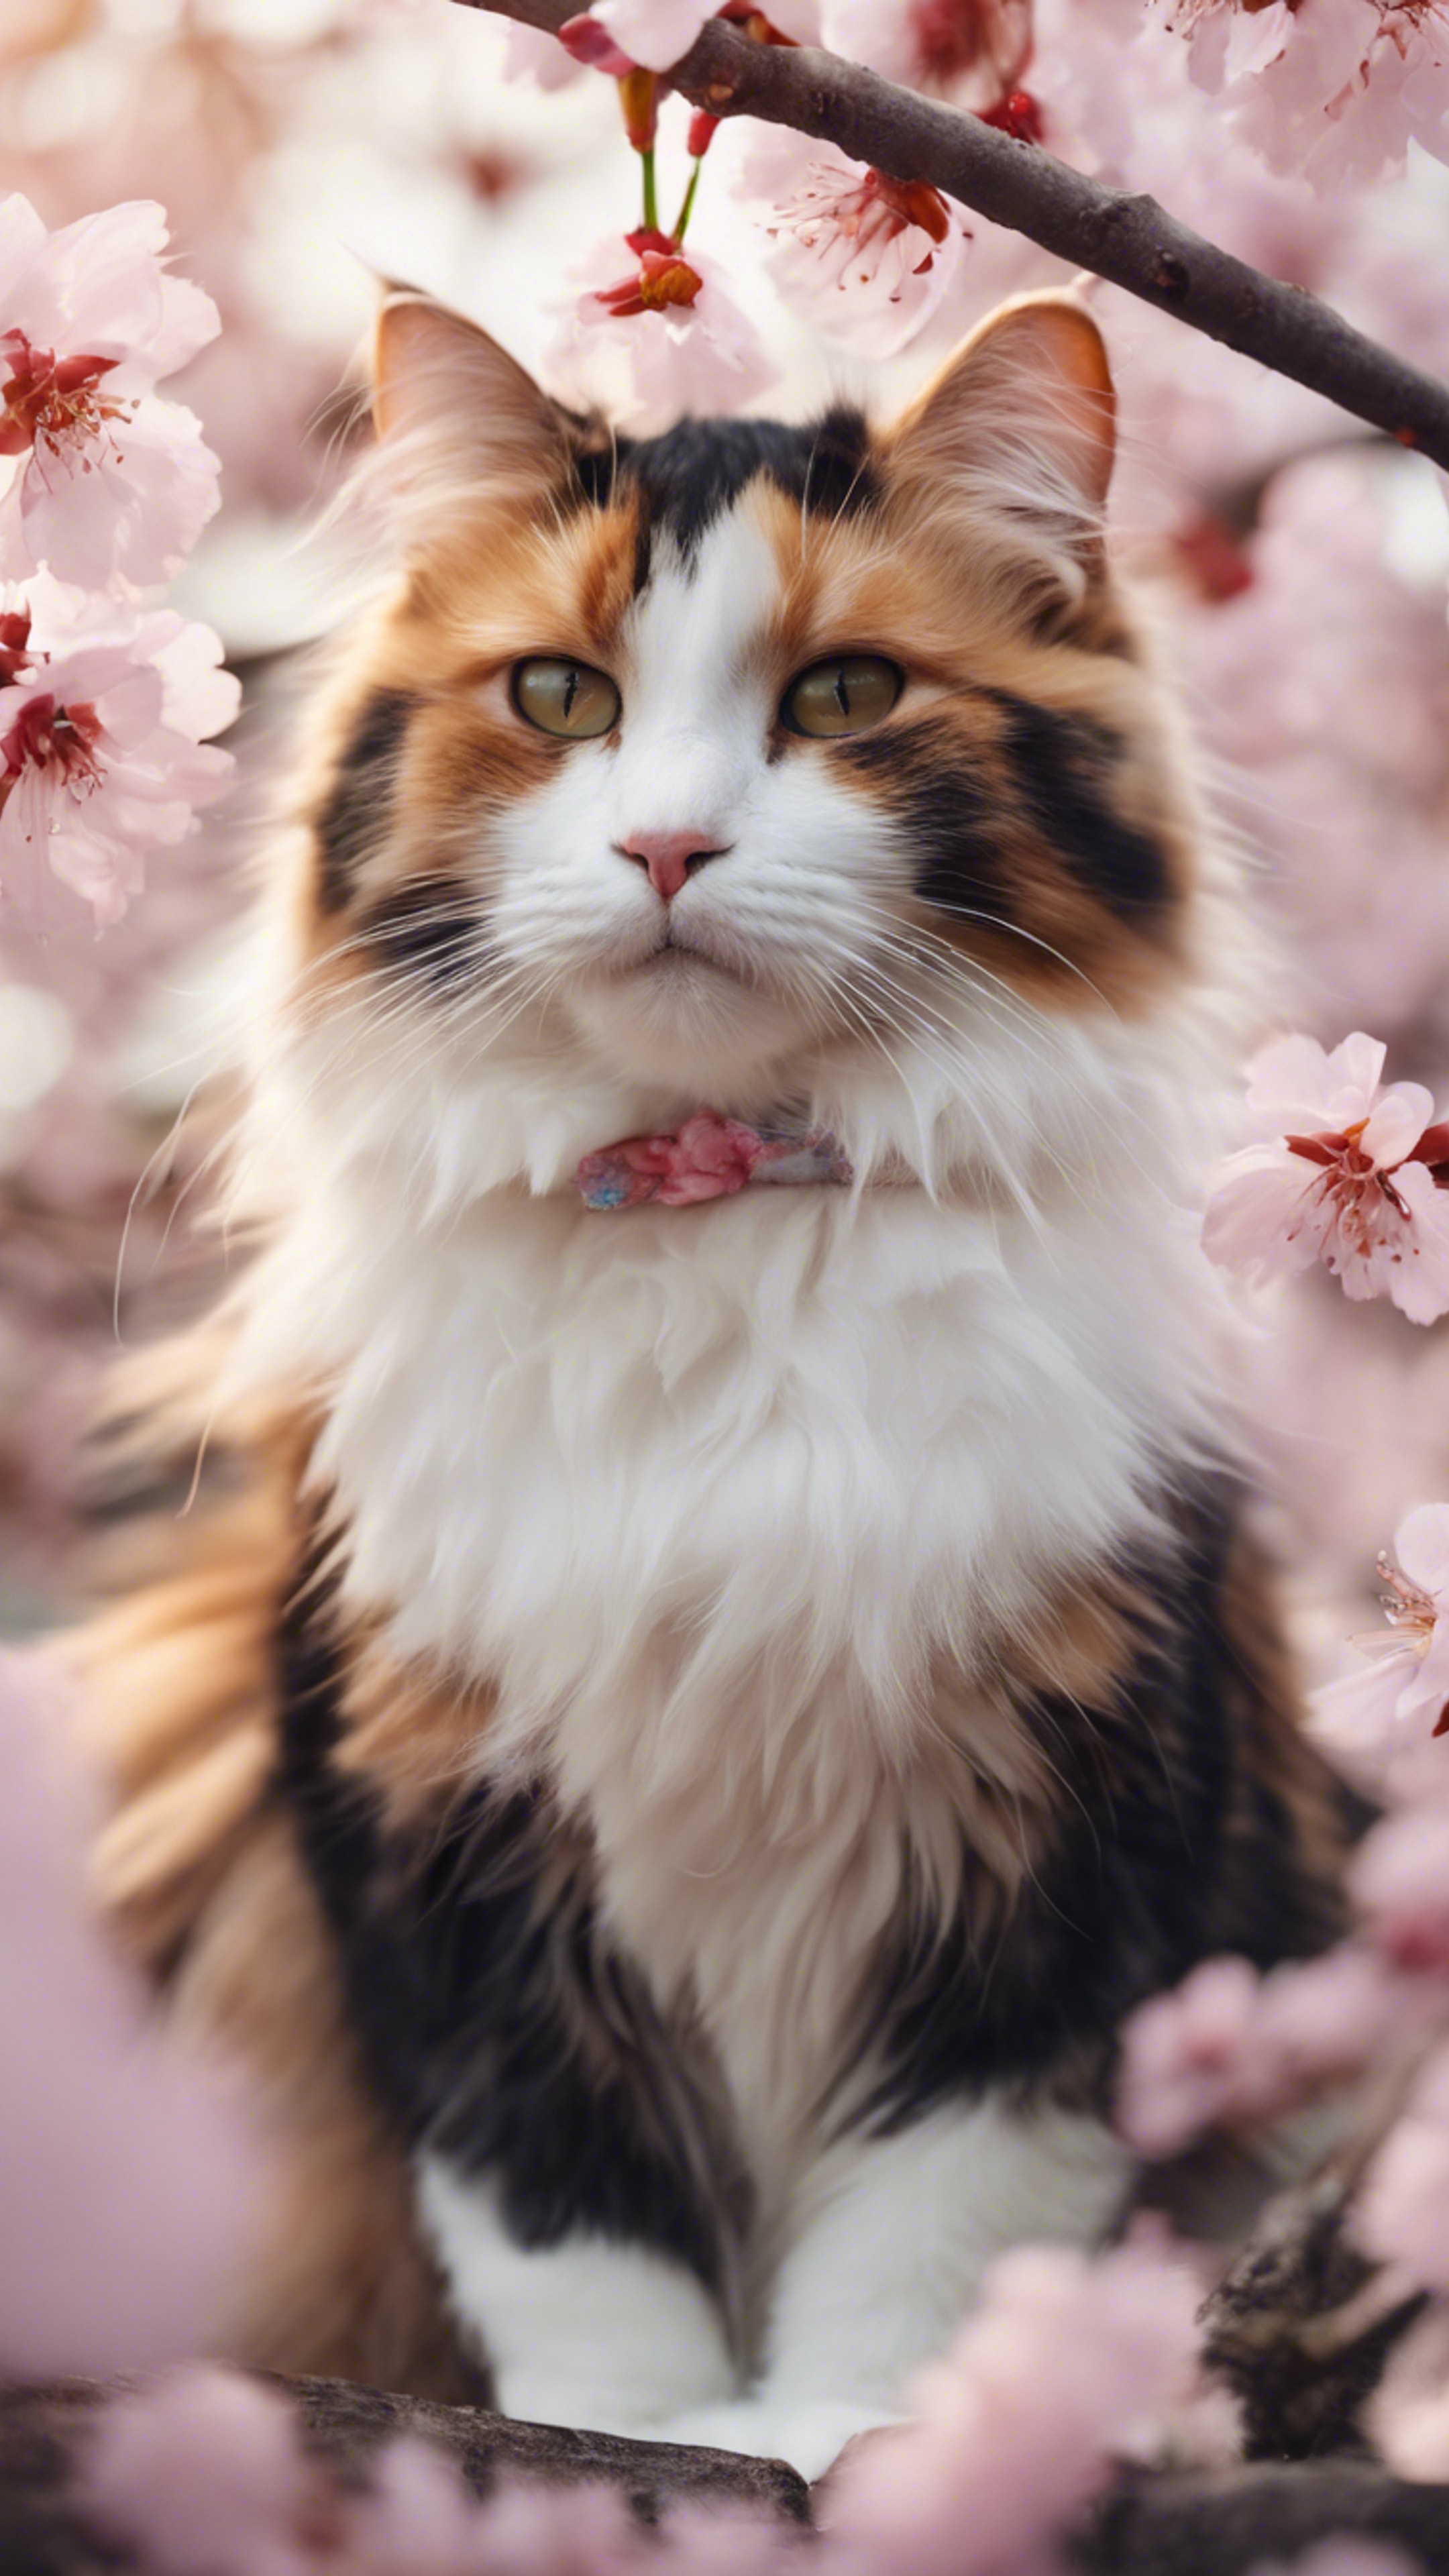 A fluffy calico cat in a cute pose sitting amongst cherry blossoms. Wallpaper[3cf3847c7c9c4f38aba7]